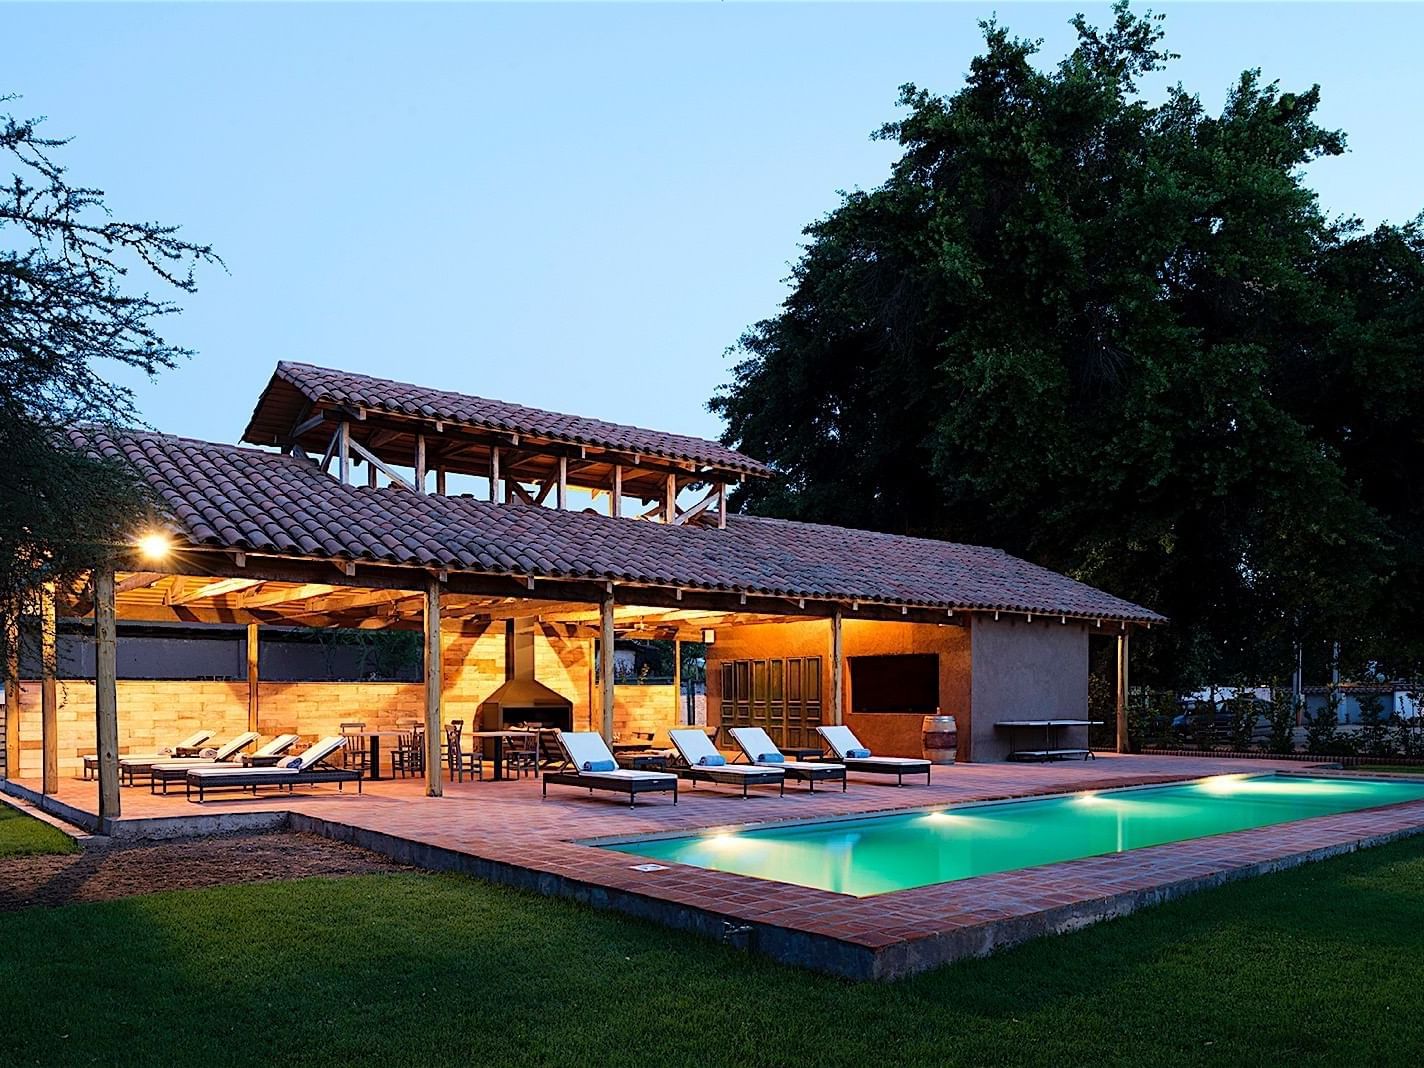 Pool house & lounge area with sunbeds at Noi Blend Colchagua 